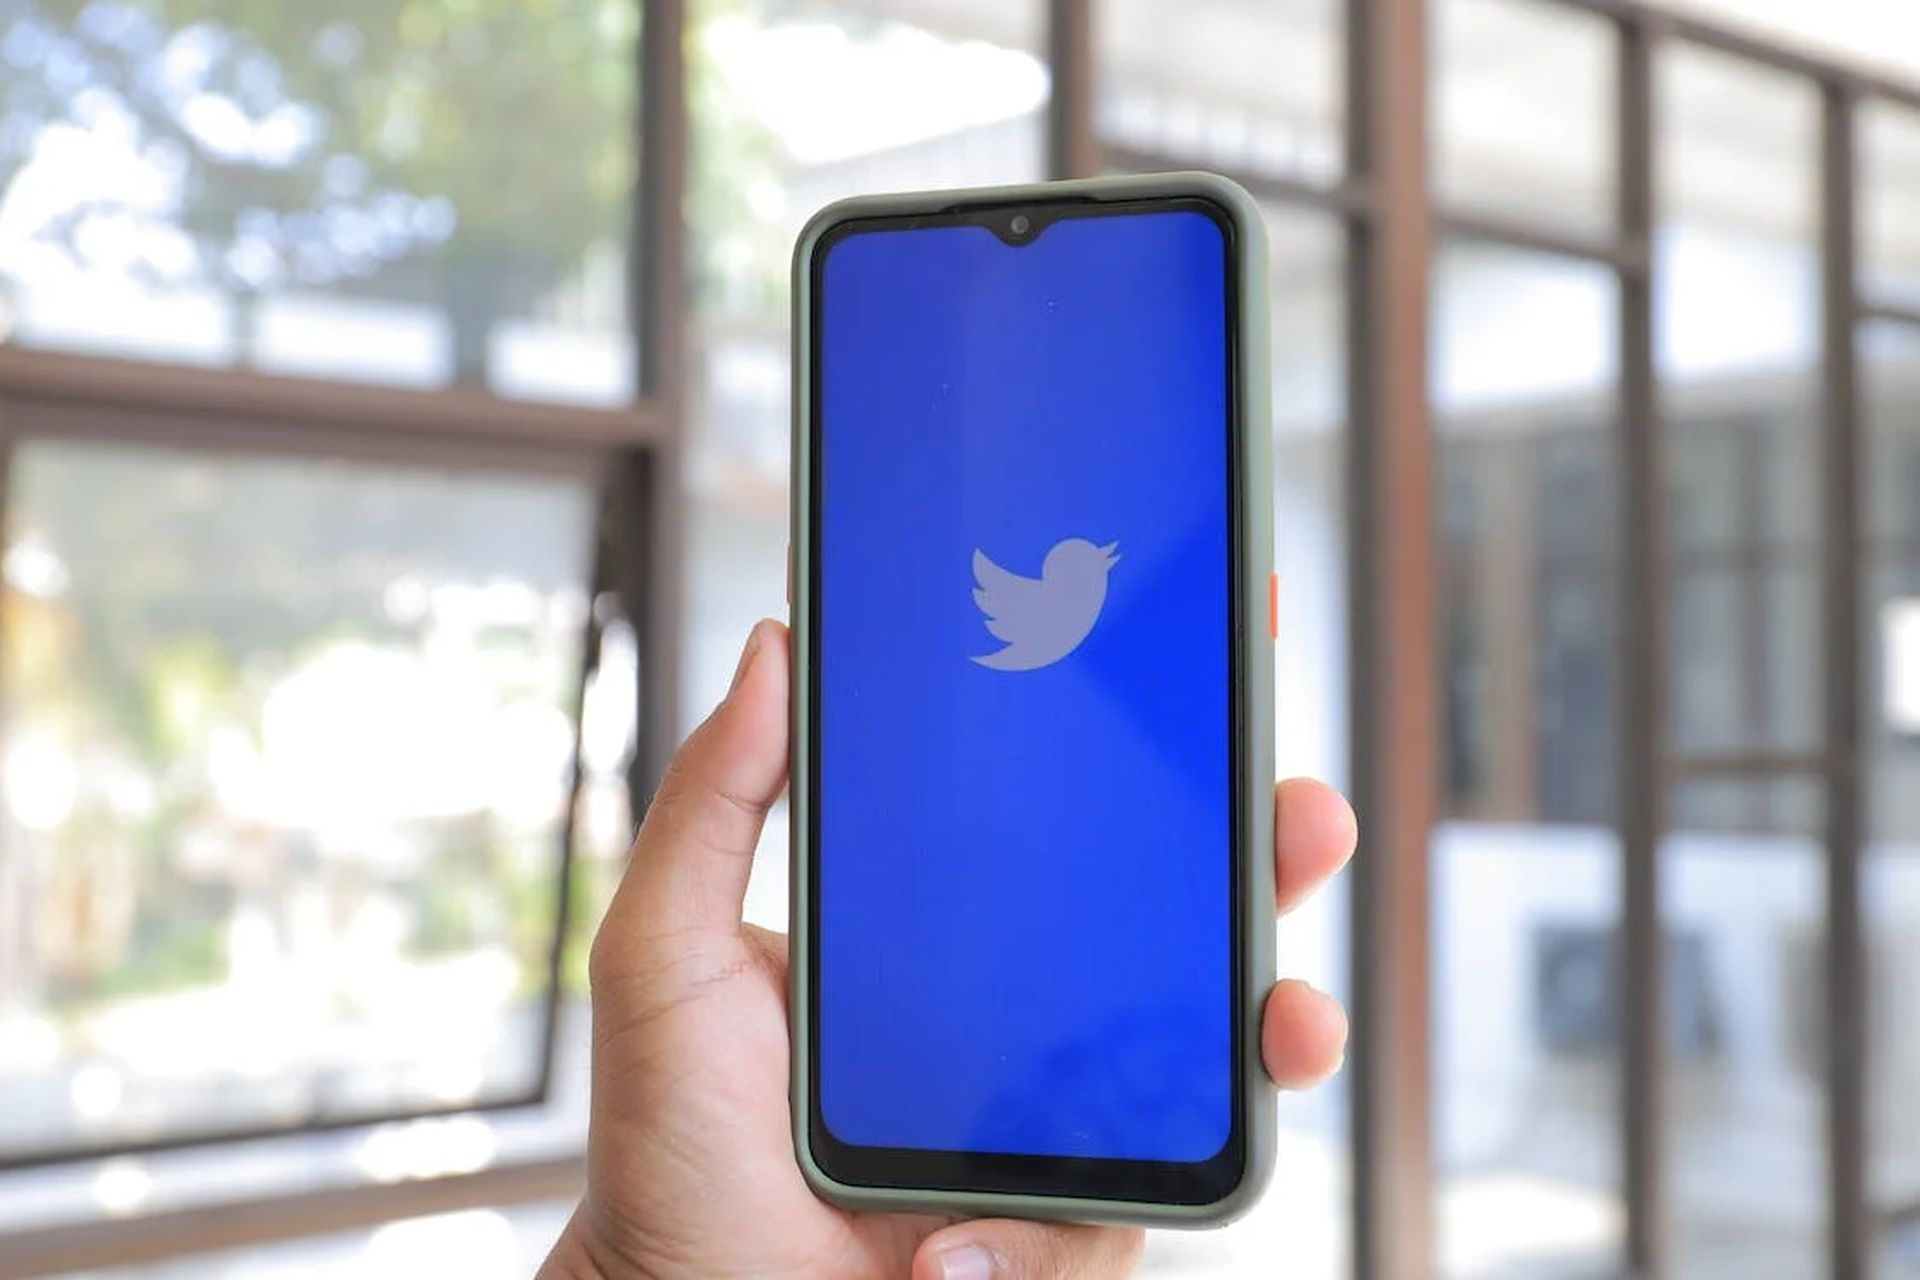 Alleged Cybersecurity Issues Of Twitter Is Causing A Headache For The Firm